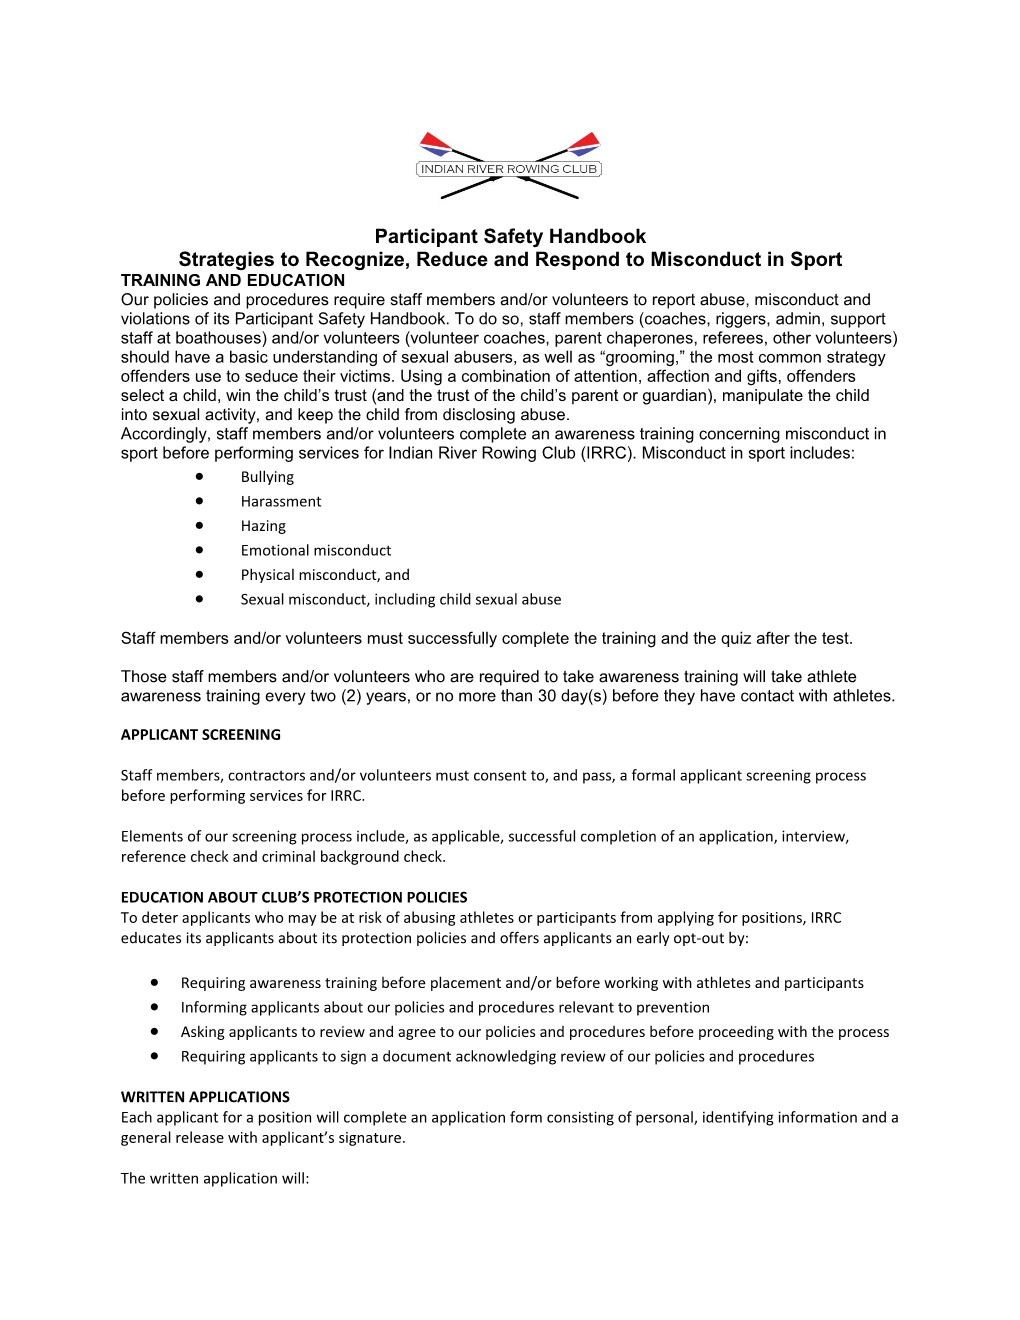 Strategies to Recognize, Reduce and Respond to Misconduct in Sport